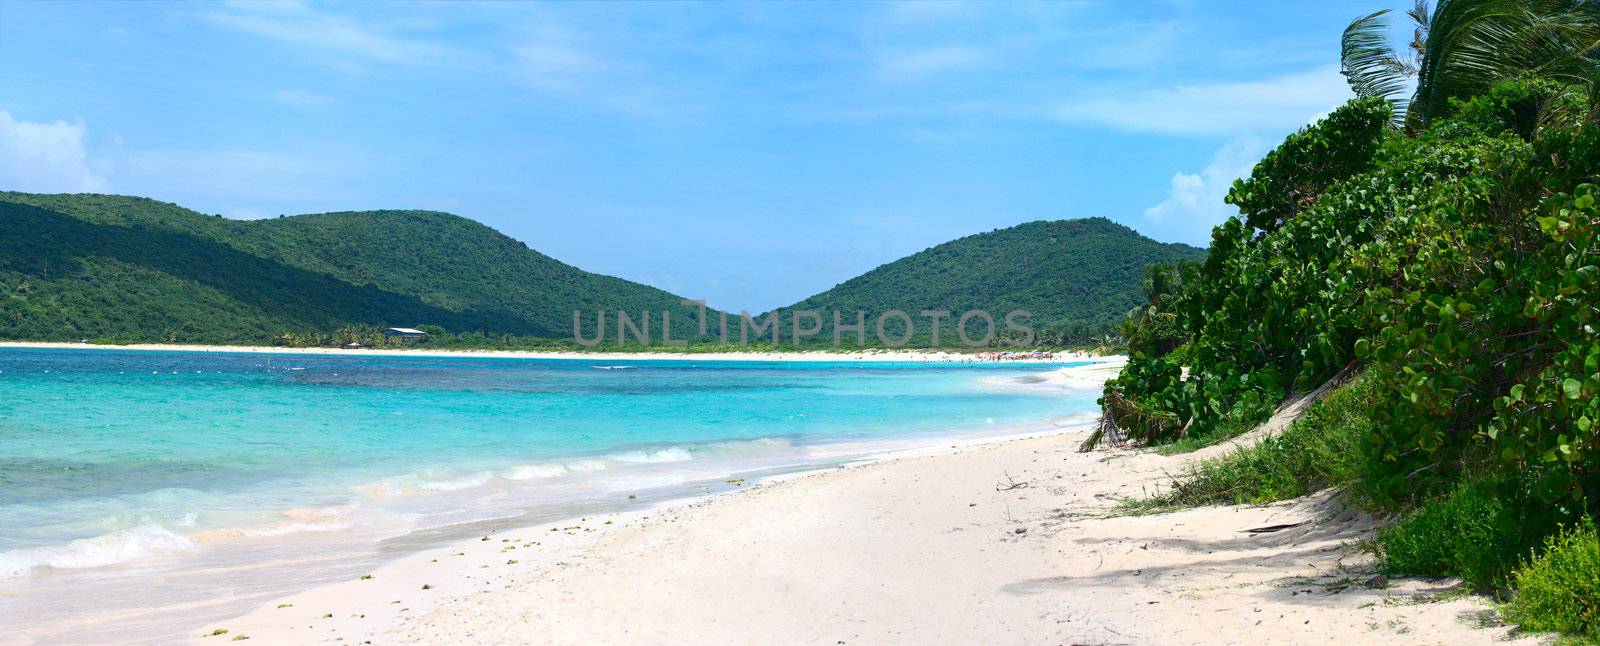 The gorgeous white sand filled Flamenco beach on the Puerto Rican island of Culebra.